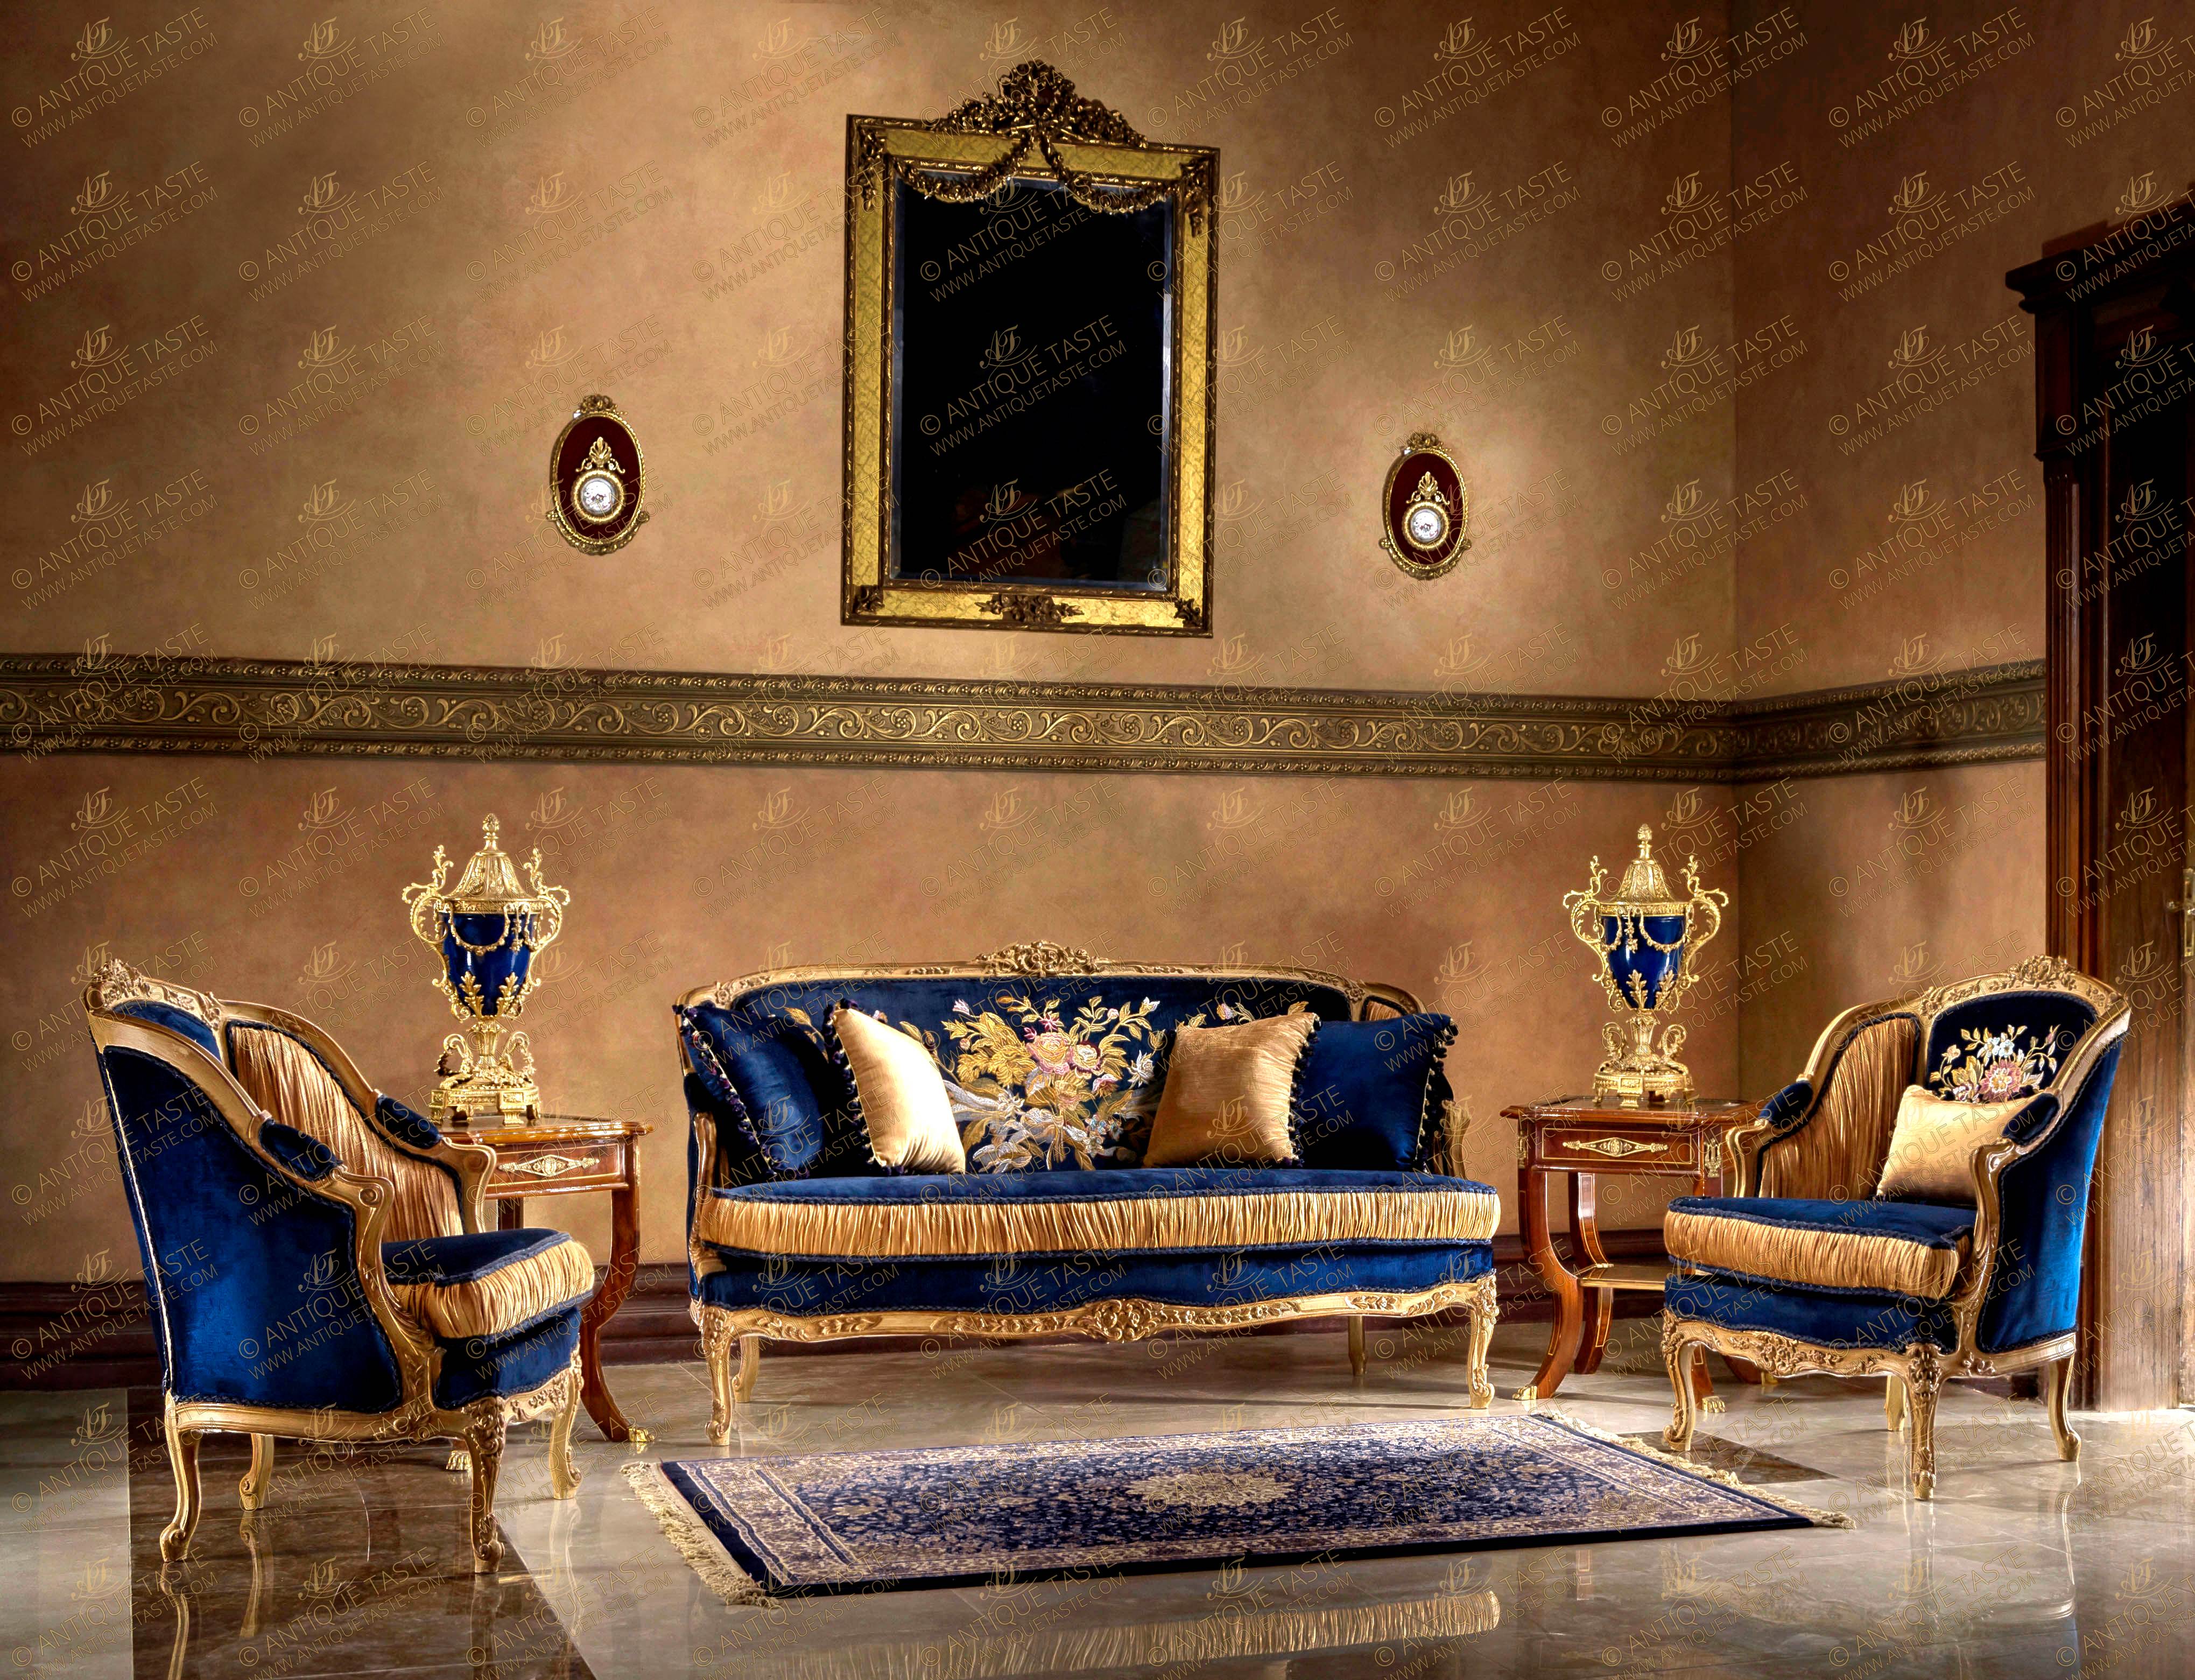 A stylish and chic French Louis XV style living room Settee Set of three pieces, hand carved, cream color painted, patinated, aged and scratched, parcel gilt French foil gilded, upholstered in dark blue and beige velvet and hand embroidered in Serma designs; raised on scrolling cabriole legs and finely carved in scrolling C works, blossoming flowers, foliate branches and acanthus leaves